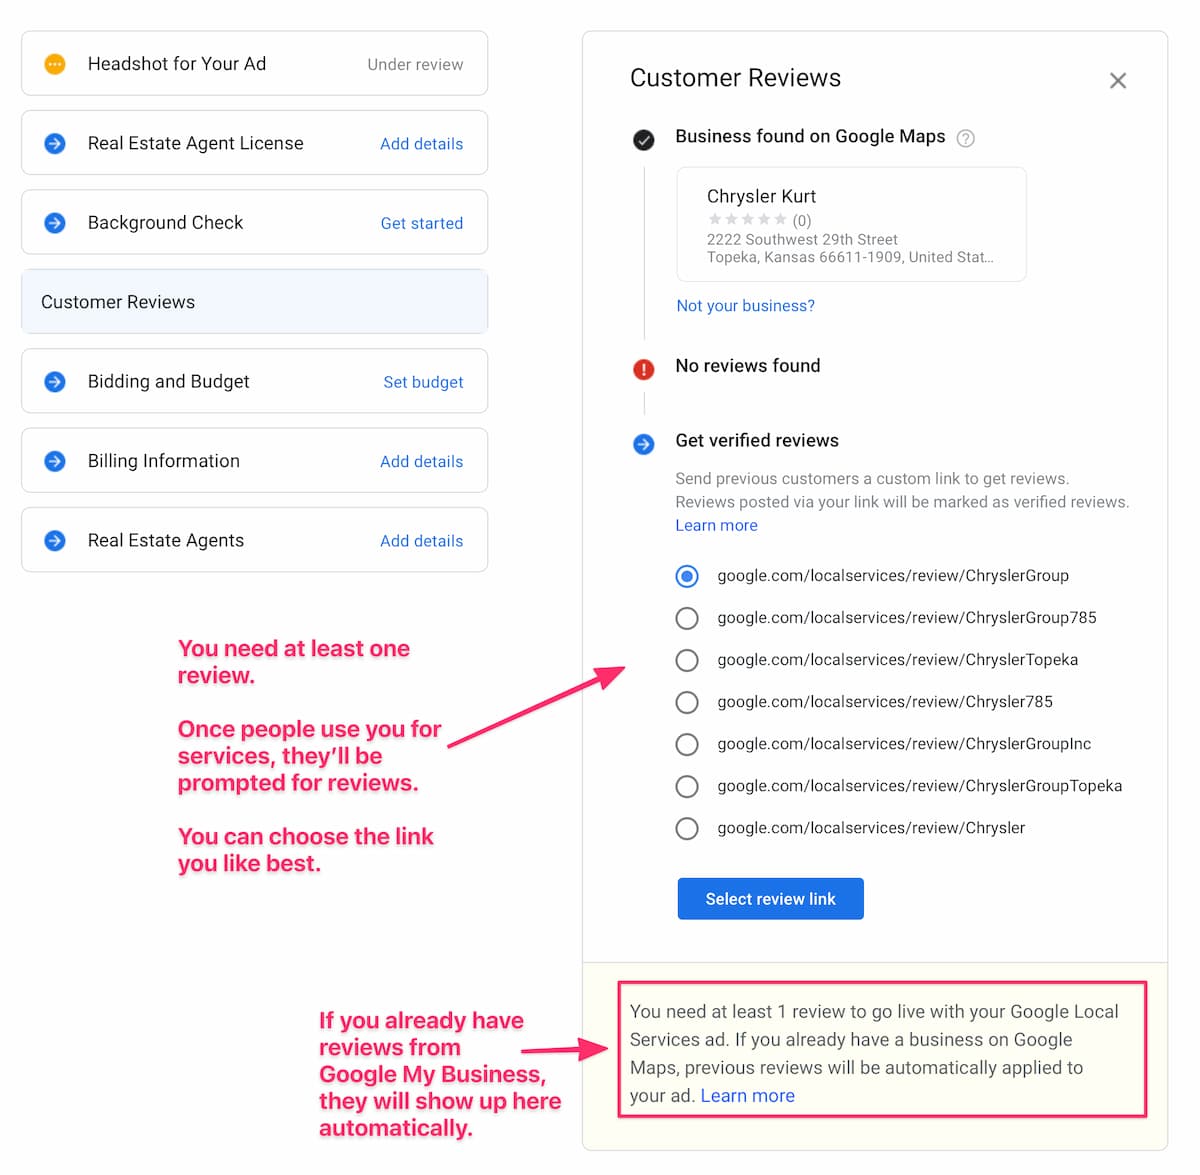 Required Reviews for Google Local Services